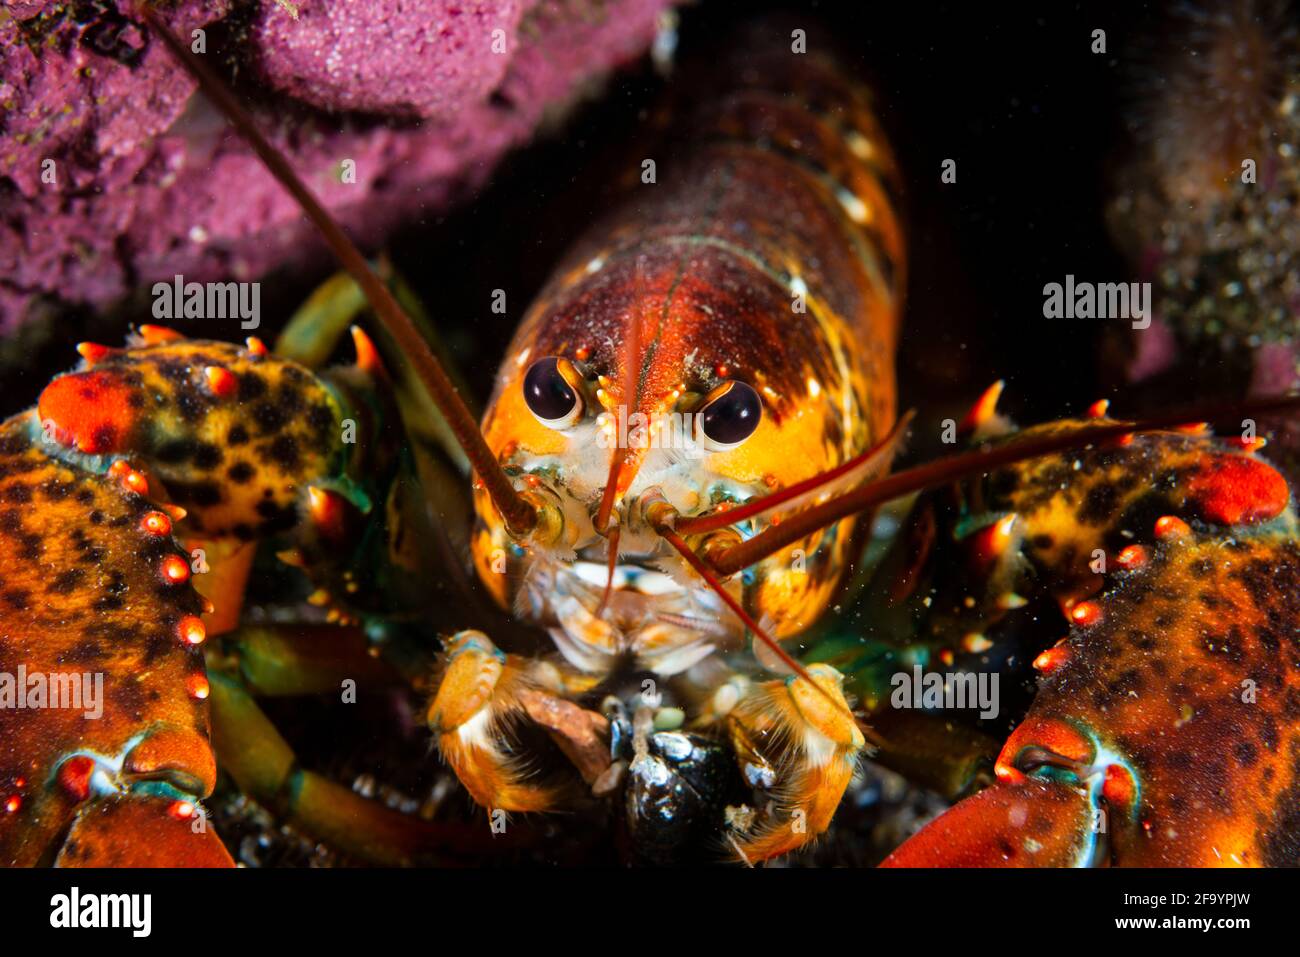 American lobster underwater foraging for food on rocky bottom. Stock Photo